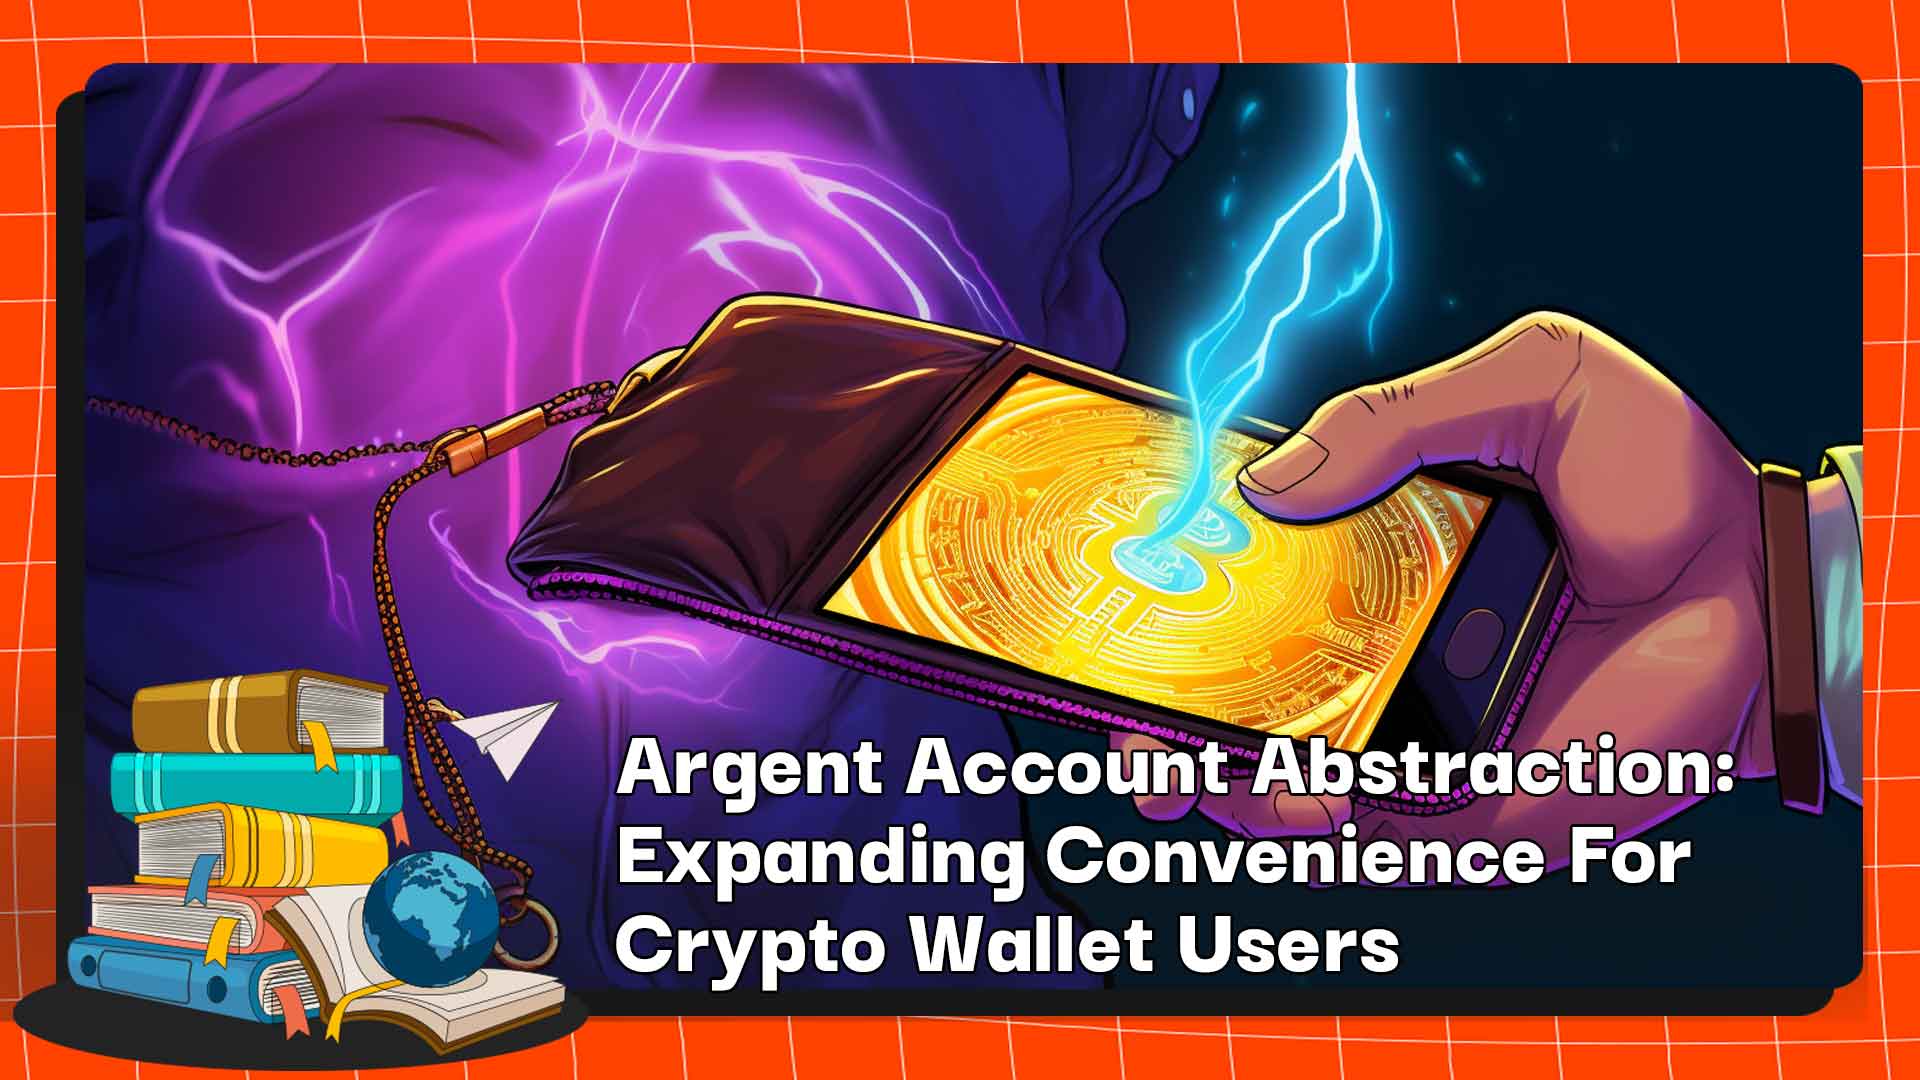 Argent Account Abstraction: Expanding Convenience For Crypto Wallet Users